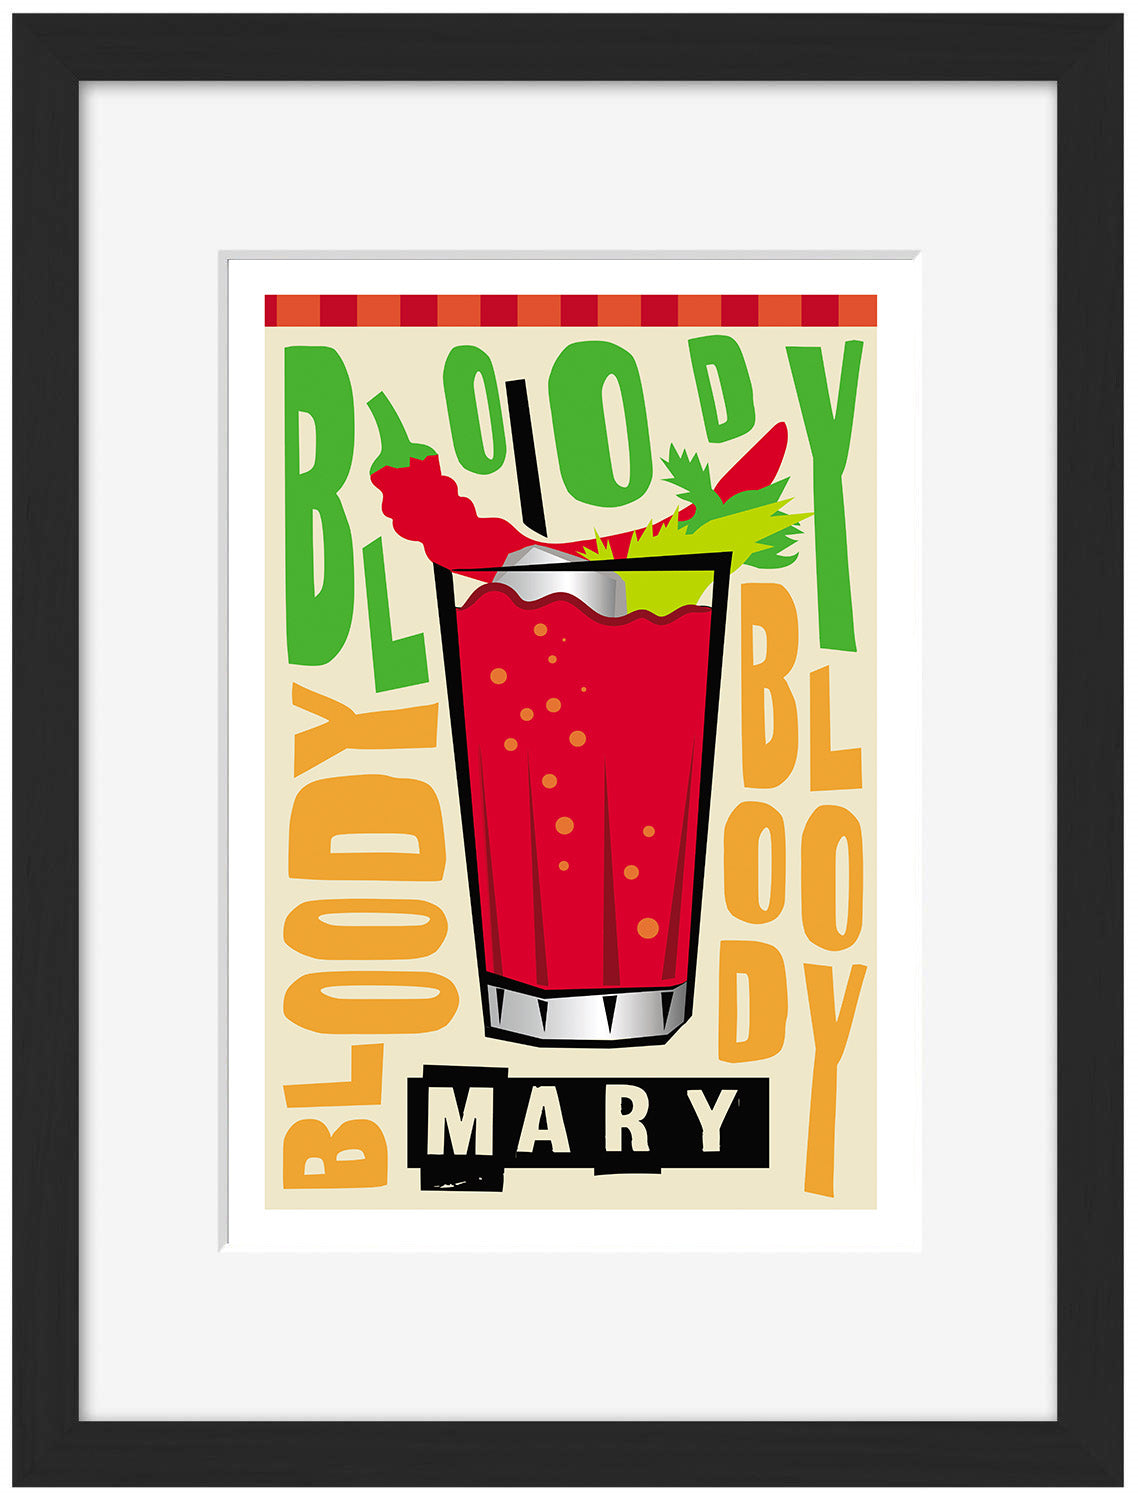 Bloody Mary-cocktails, print-Framed Print-30 x 40 cm-BLUE SHAKER